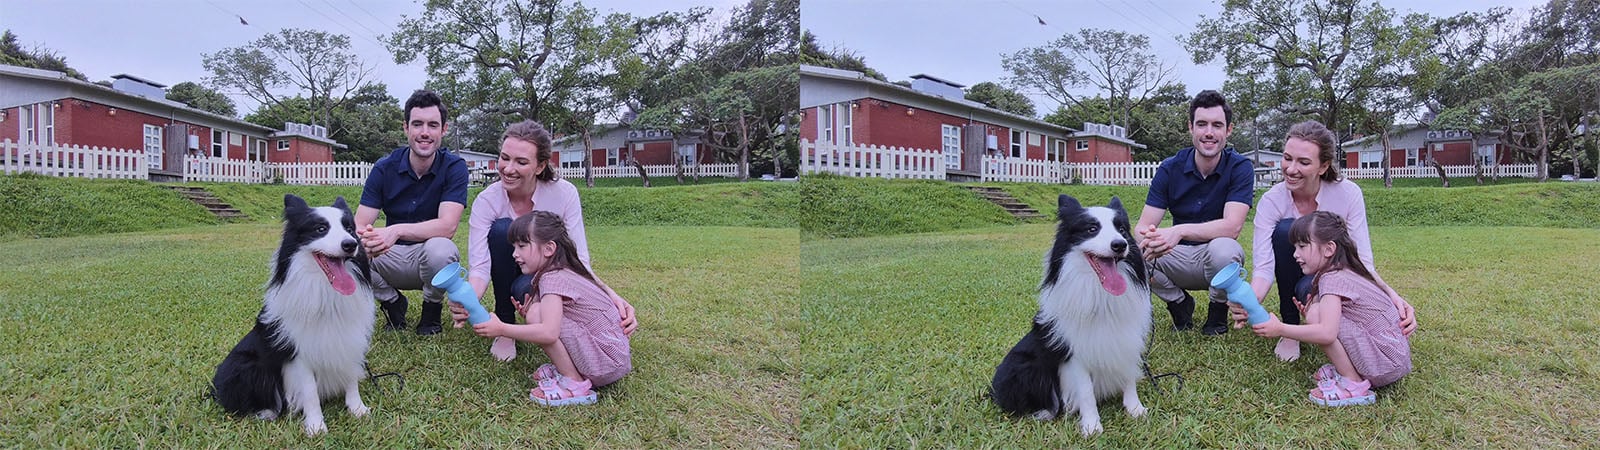 A family of three sits on grass in front of a red house. A man and woman smile as a young girl offers a toy to a black and white dog. Trees and a fence are visible in the background. The photo is mirrored side by side with identical images.